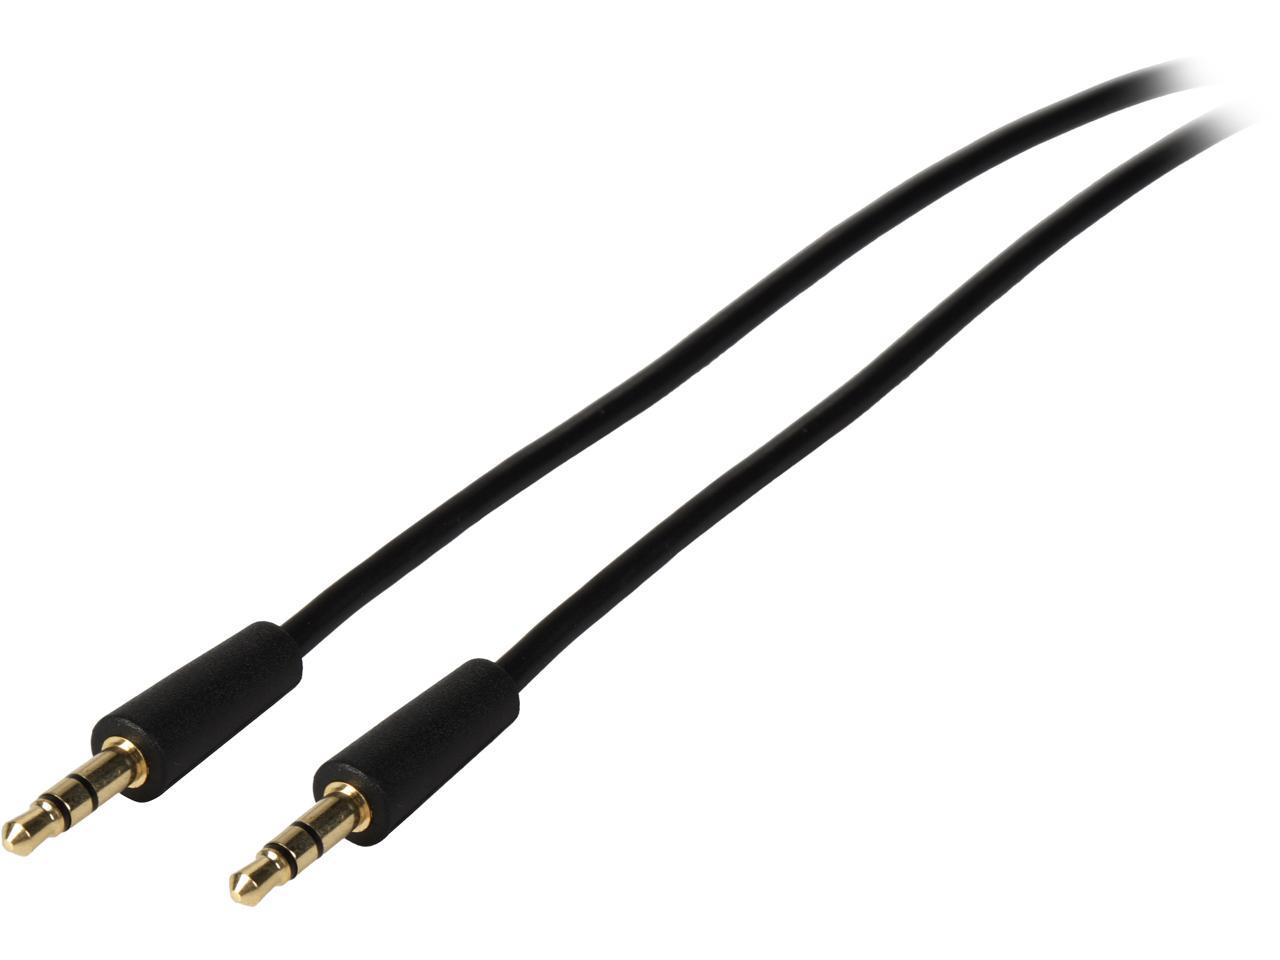 Tripp Lite P312-001 3.5mm Mini Stereo Audio Cable for Microphones, Speakers and Headphones Male to Male - image 1 of 4